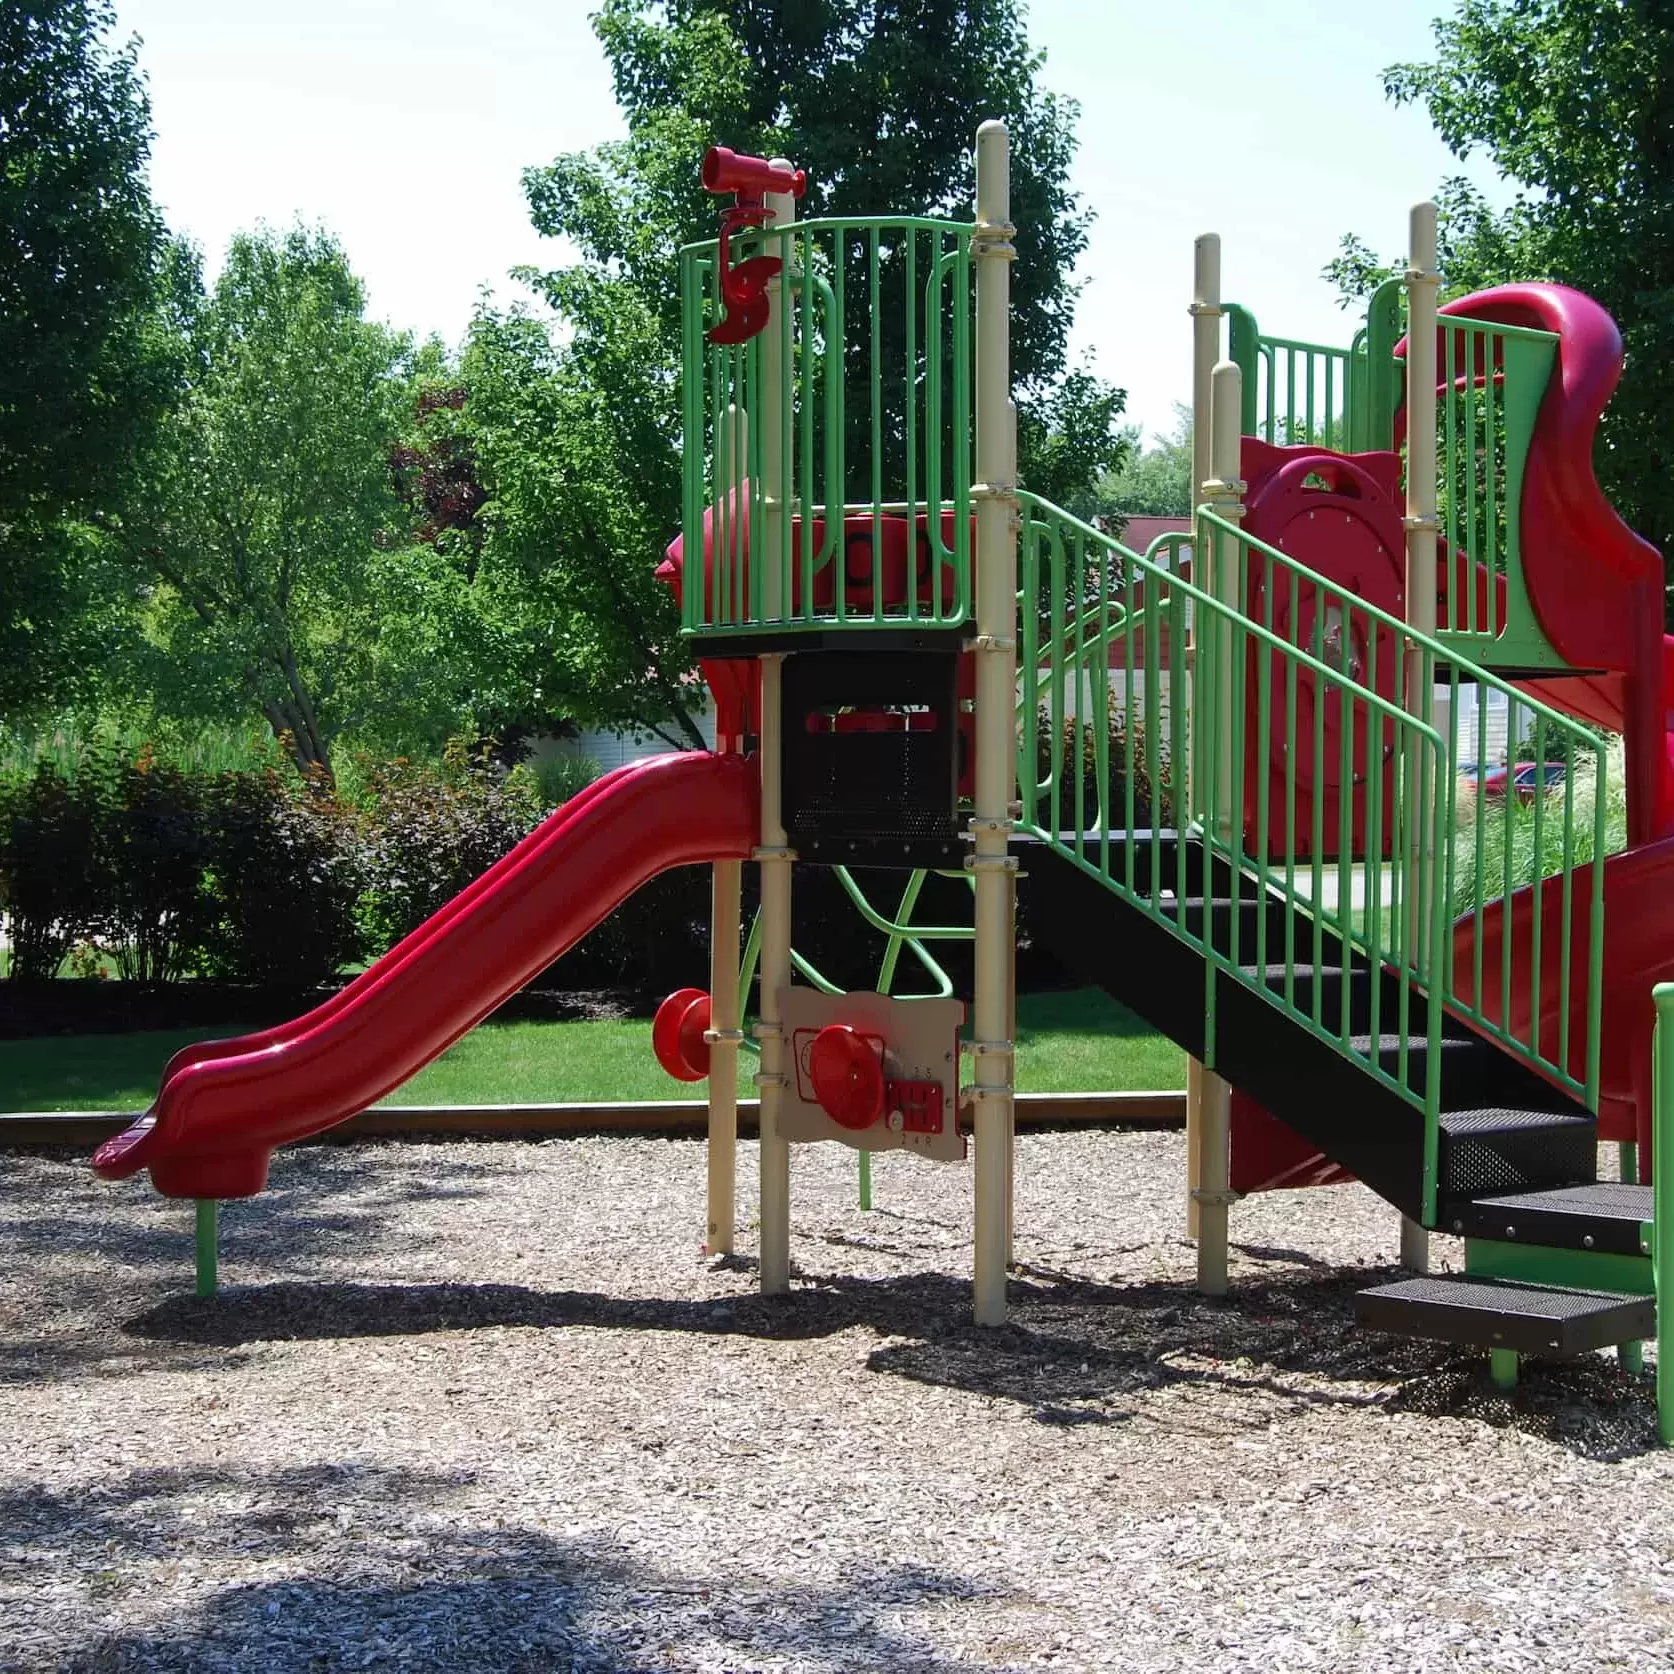 A playground with slides for the children in the apartment community.